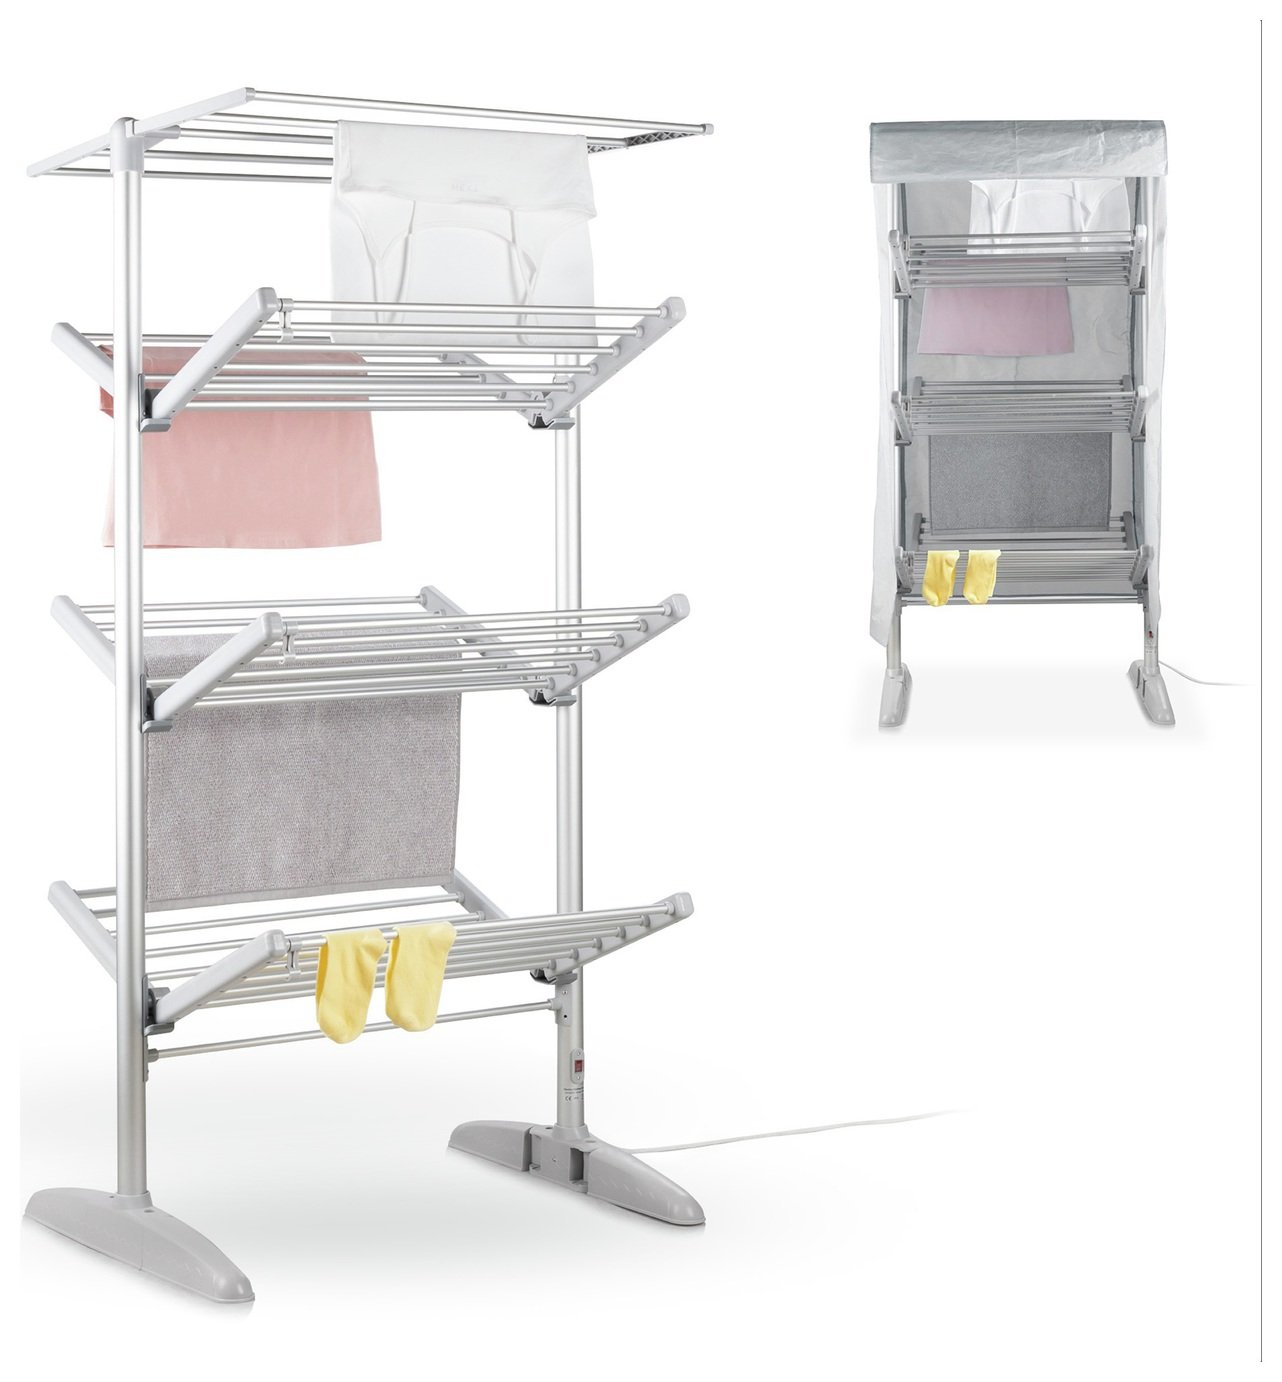 Minky Sure Dri 23m 4 Tier Heated Clothes Airer with Cover